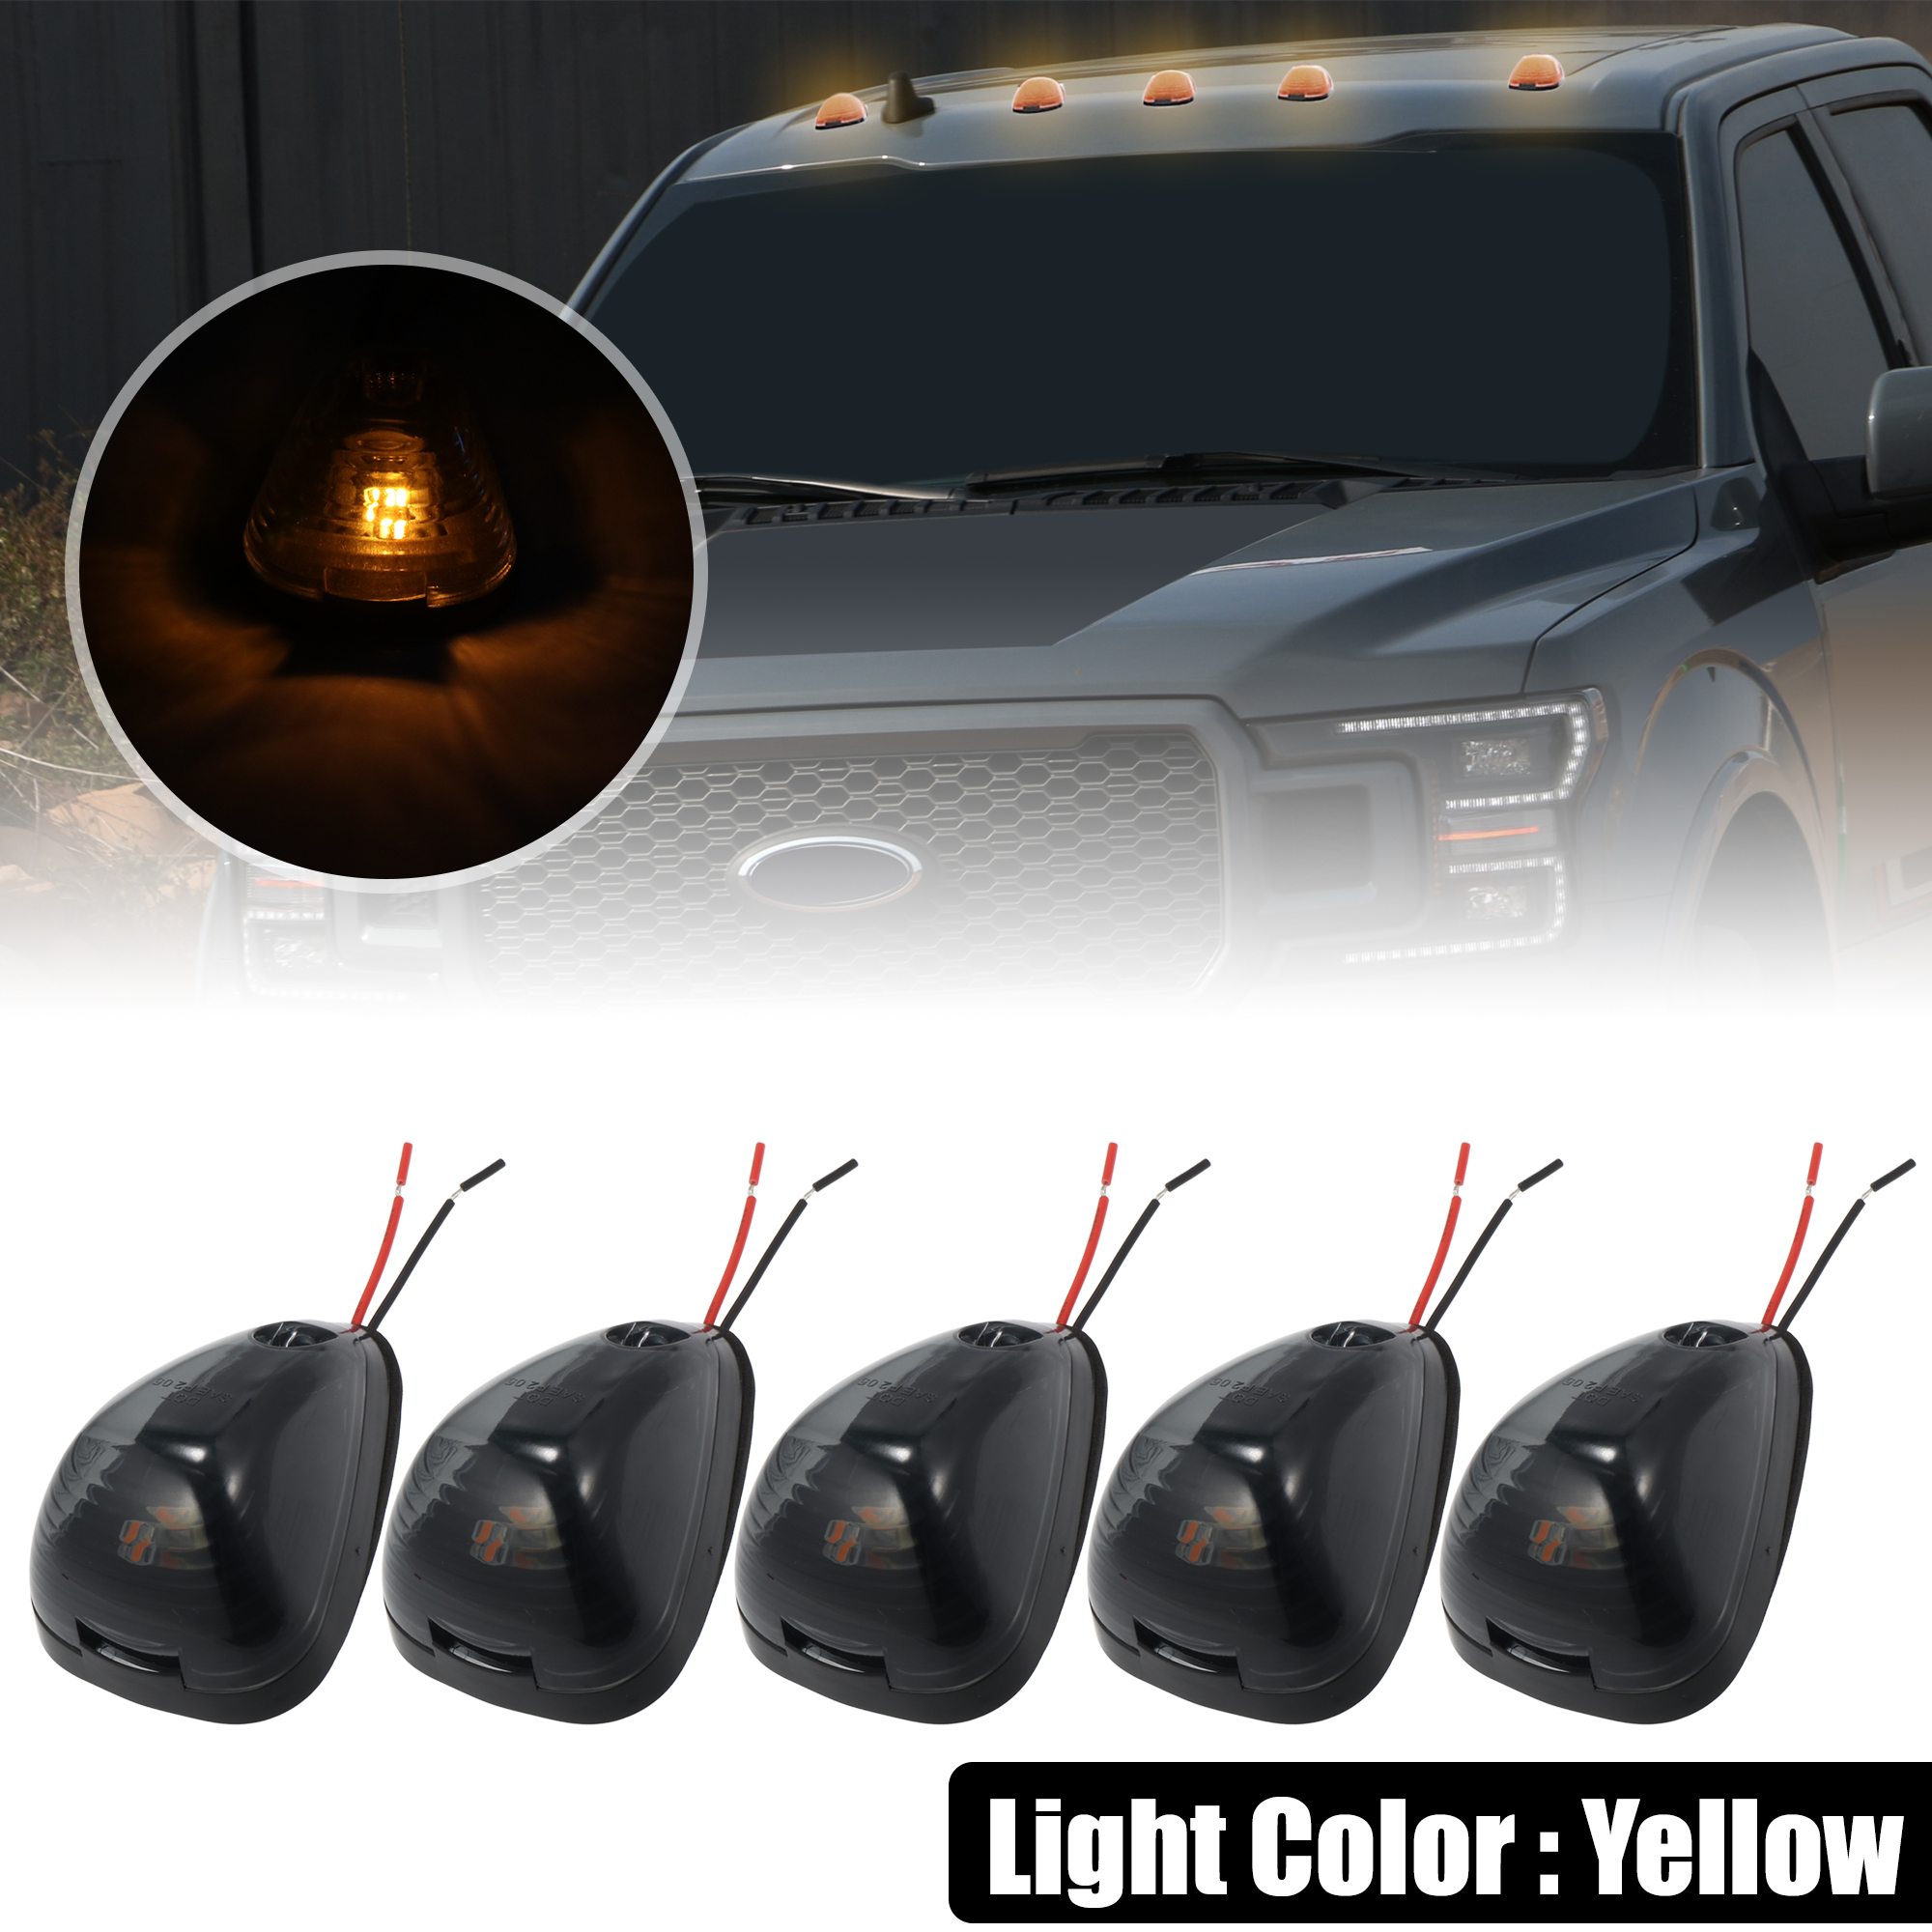 Unique Bargains 5pcs Top Cab Marker Light Smoked Black Cover Yellow Light for Ford F150 99-16